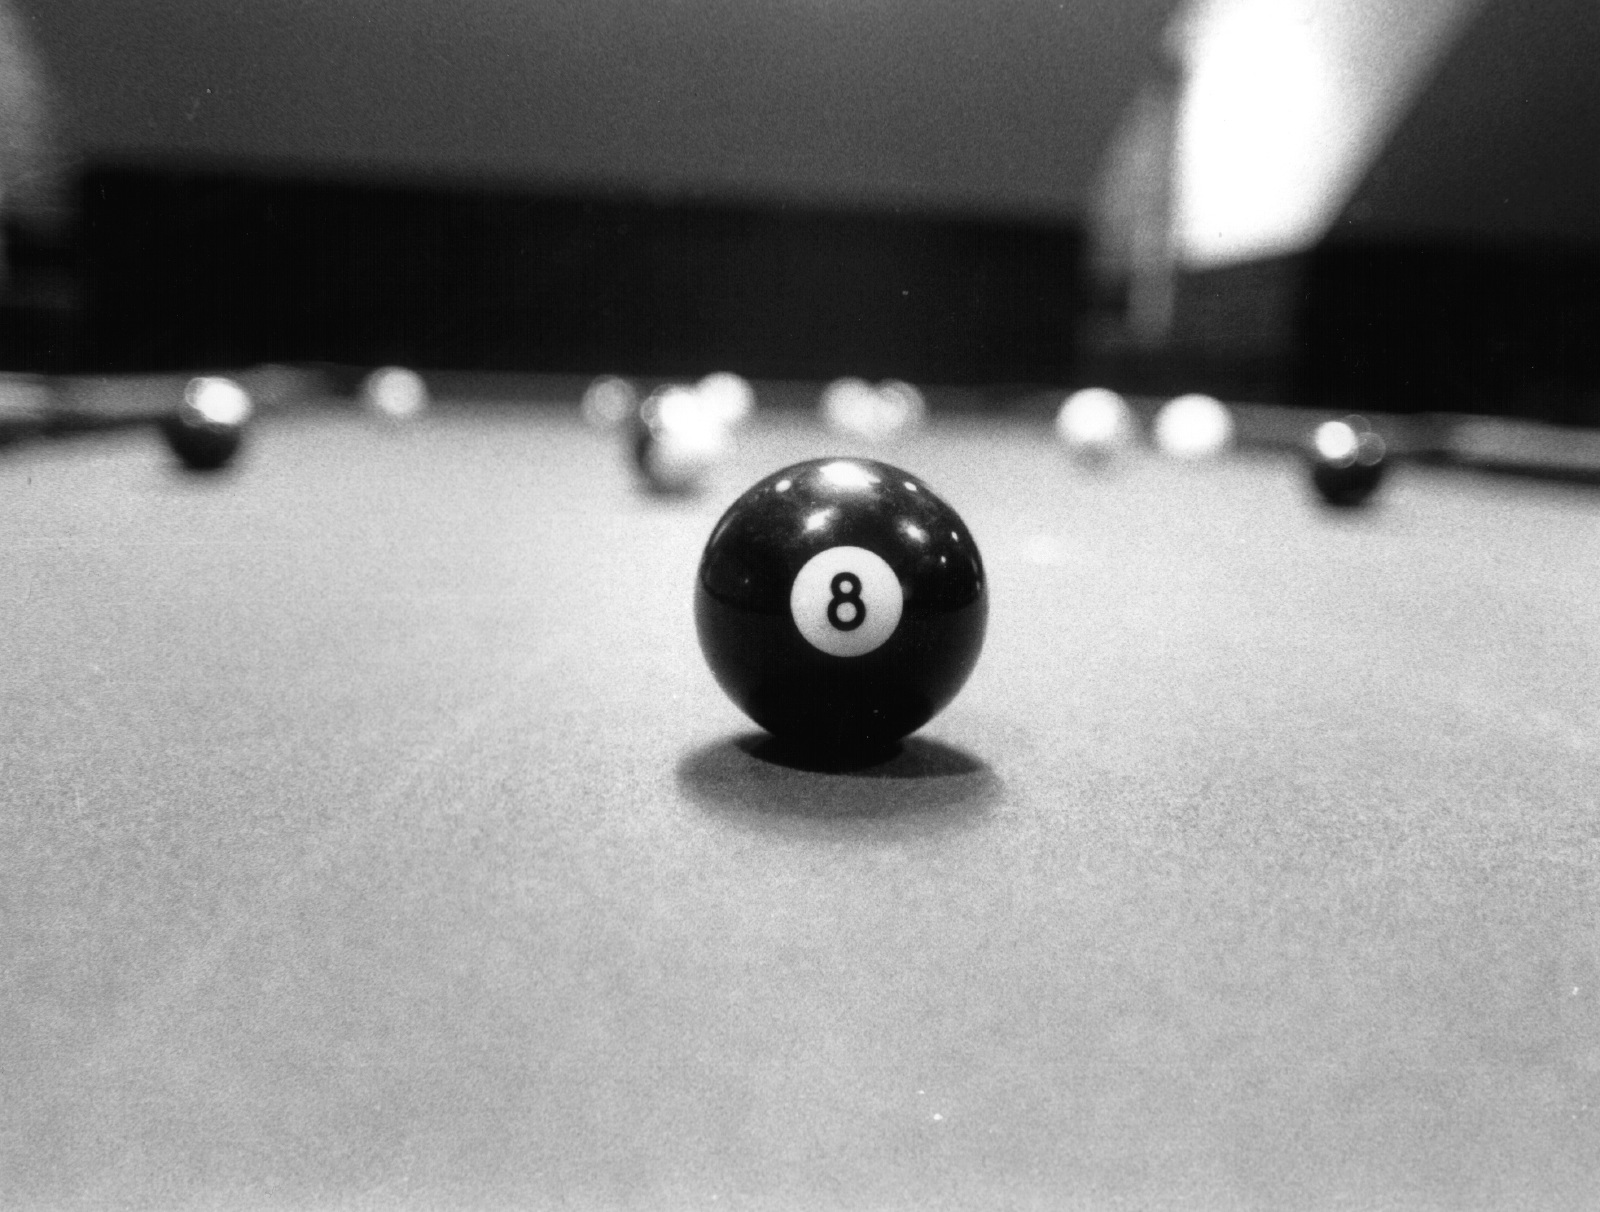 8 Ball Wallpaper for PC | Full HD Pictures